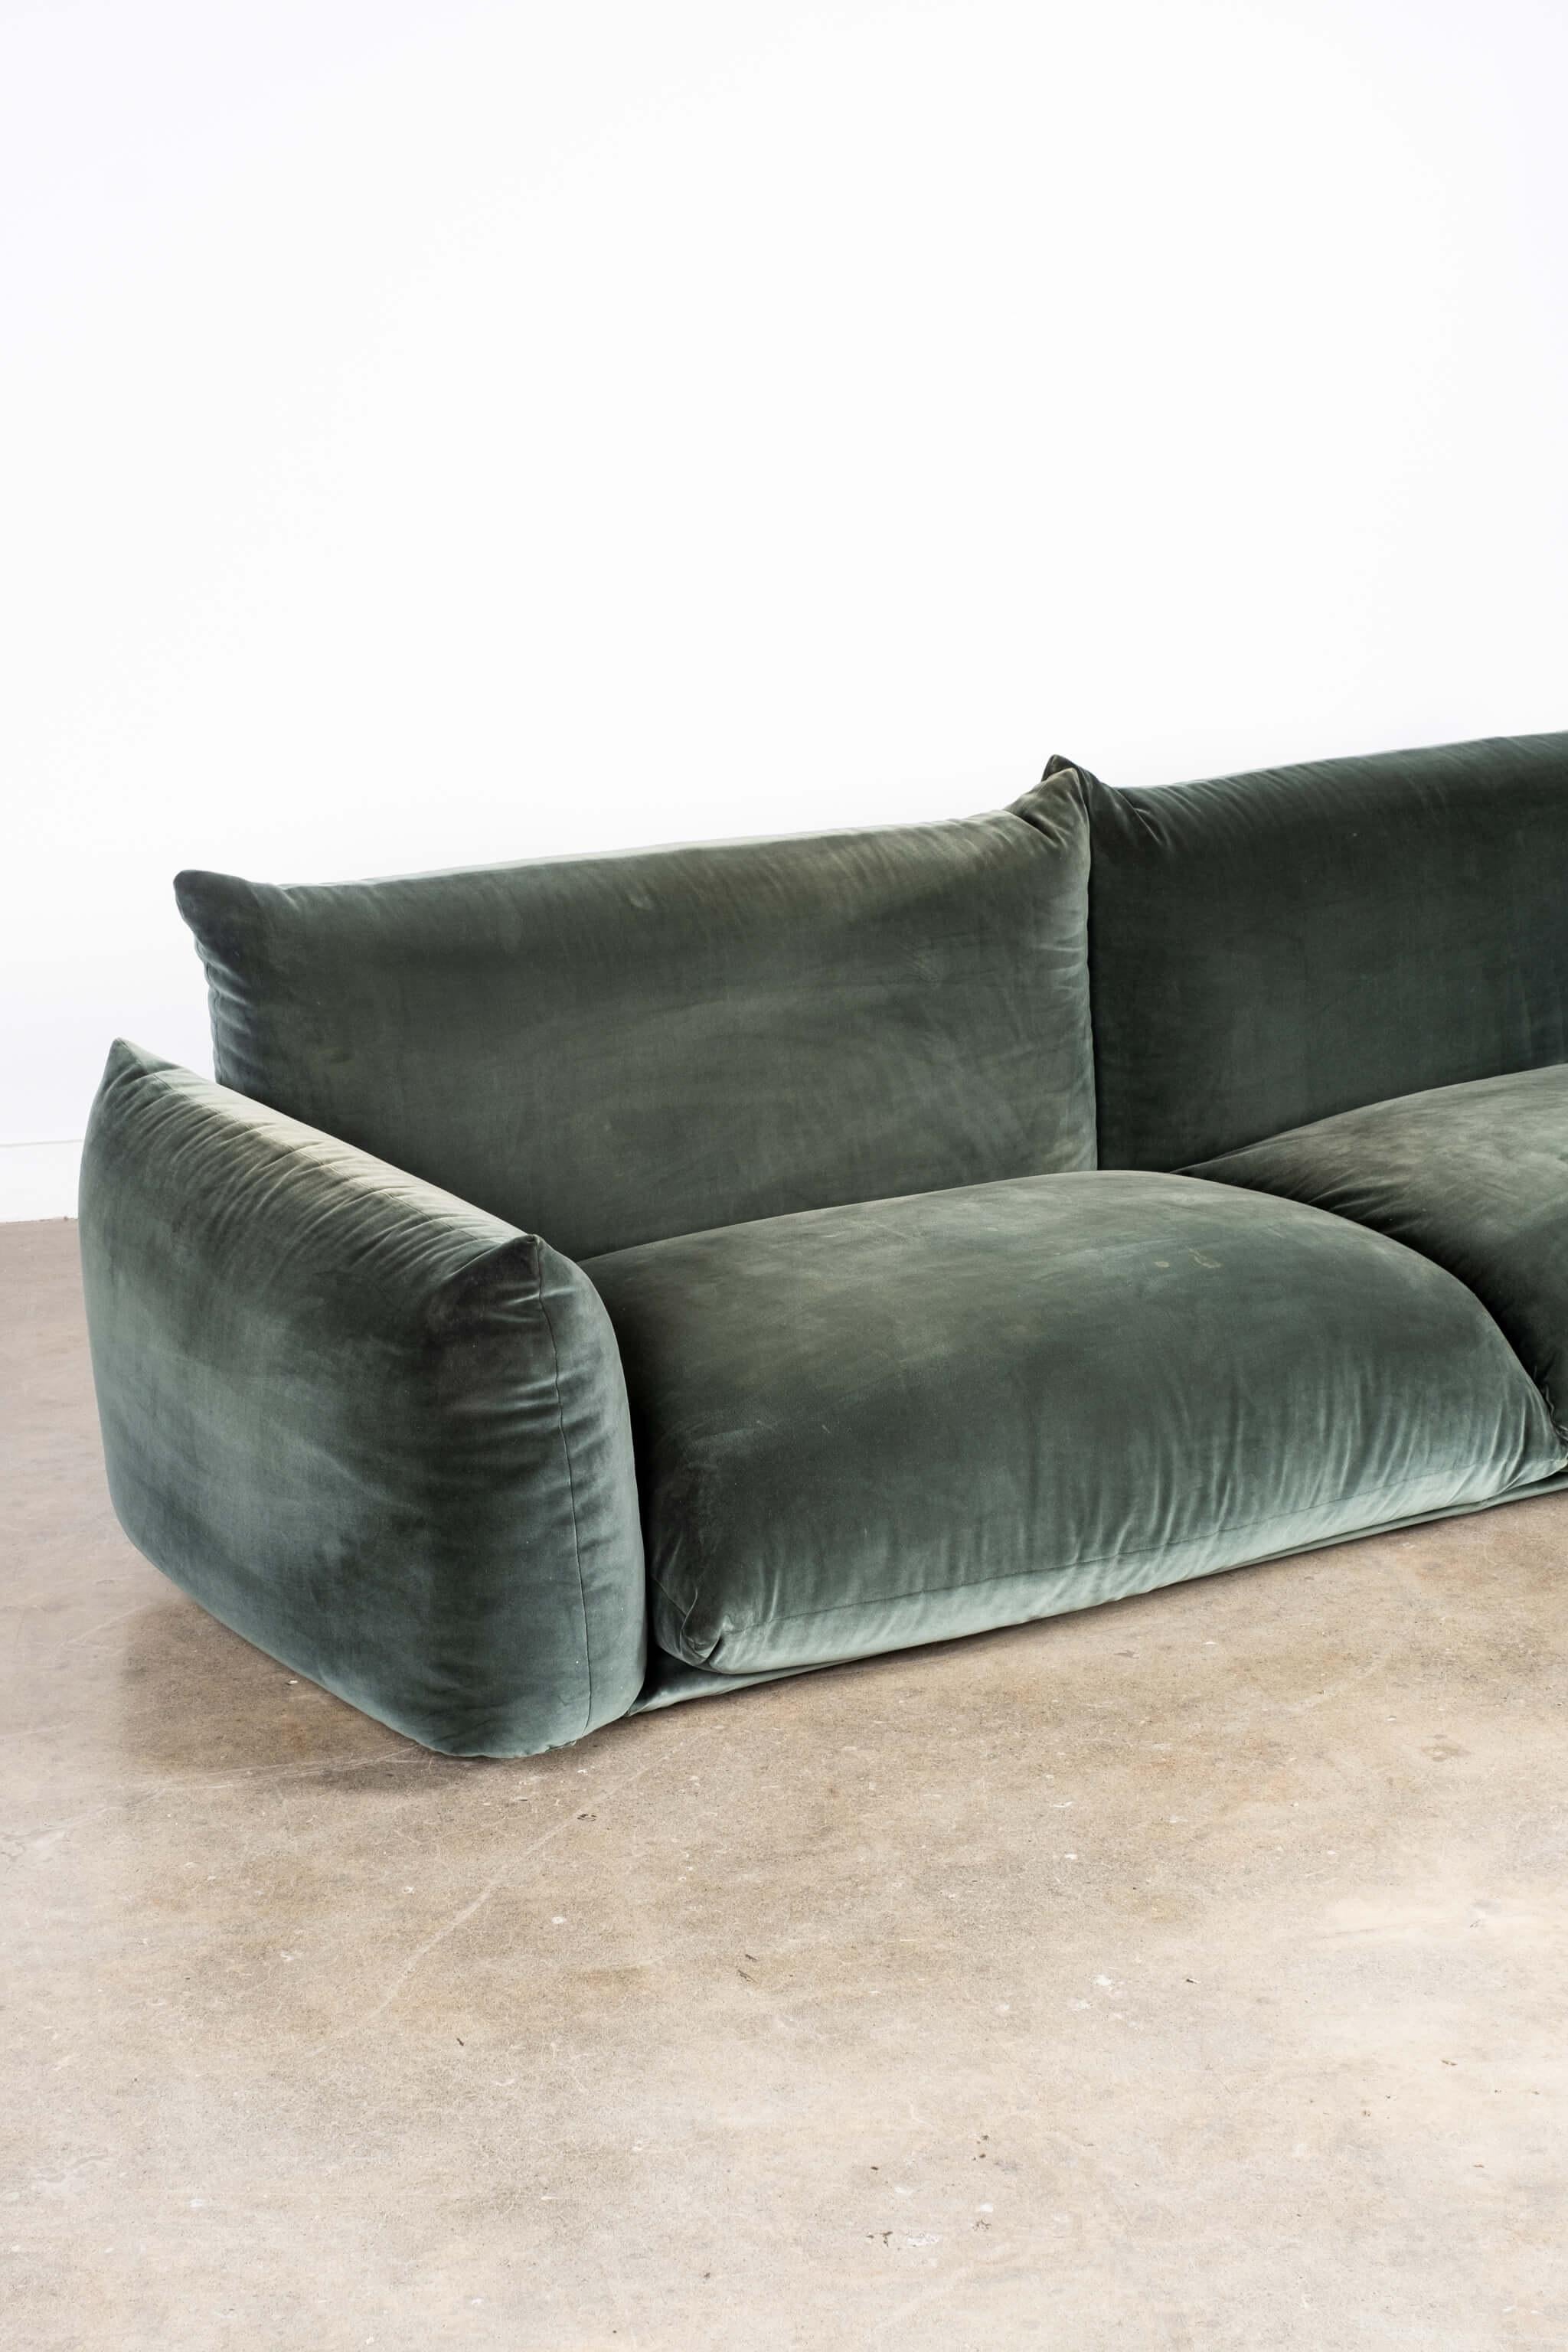 Marenco 1 Arm 2-Seater Sofa in Green Velvet by Mario Marenco In Good Condition For Sale In Toronto, CA